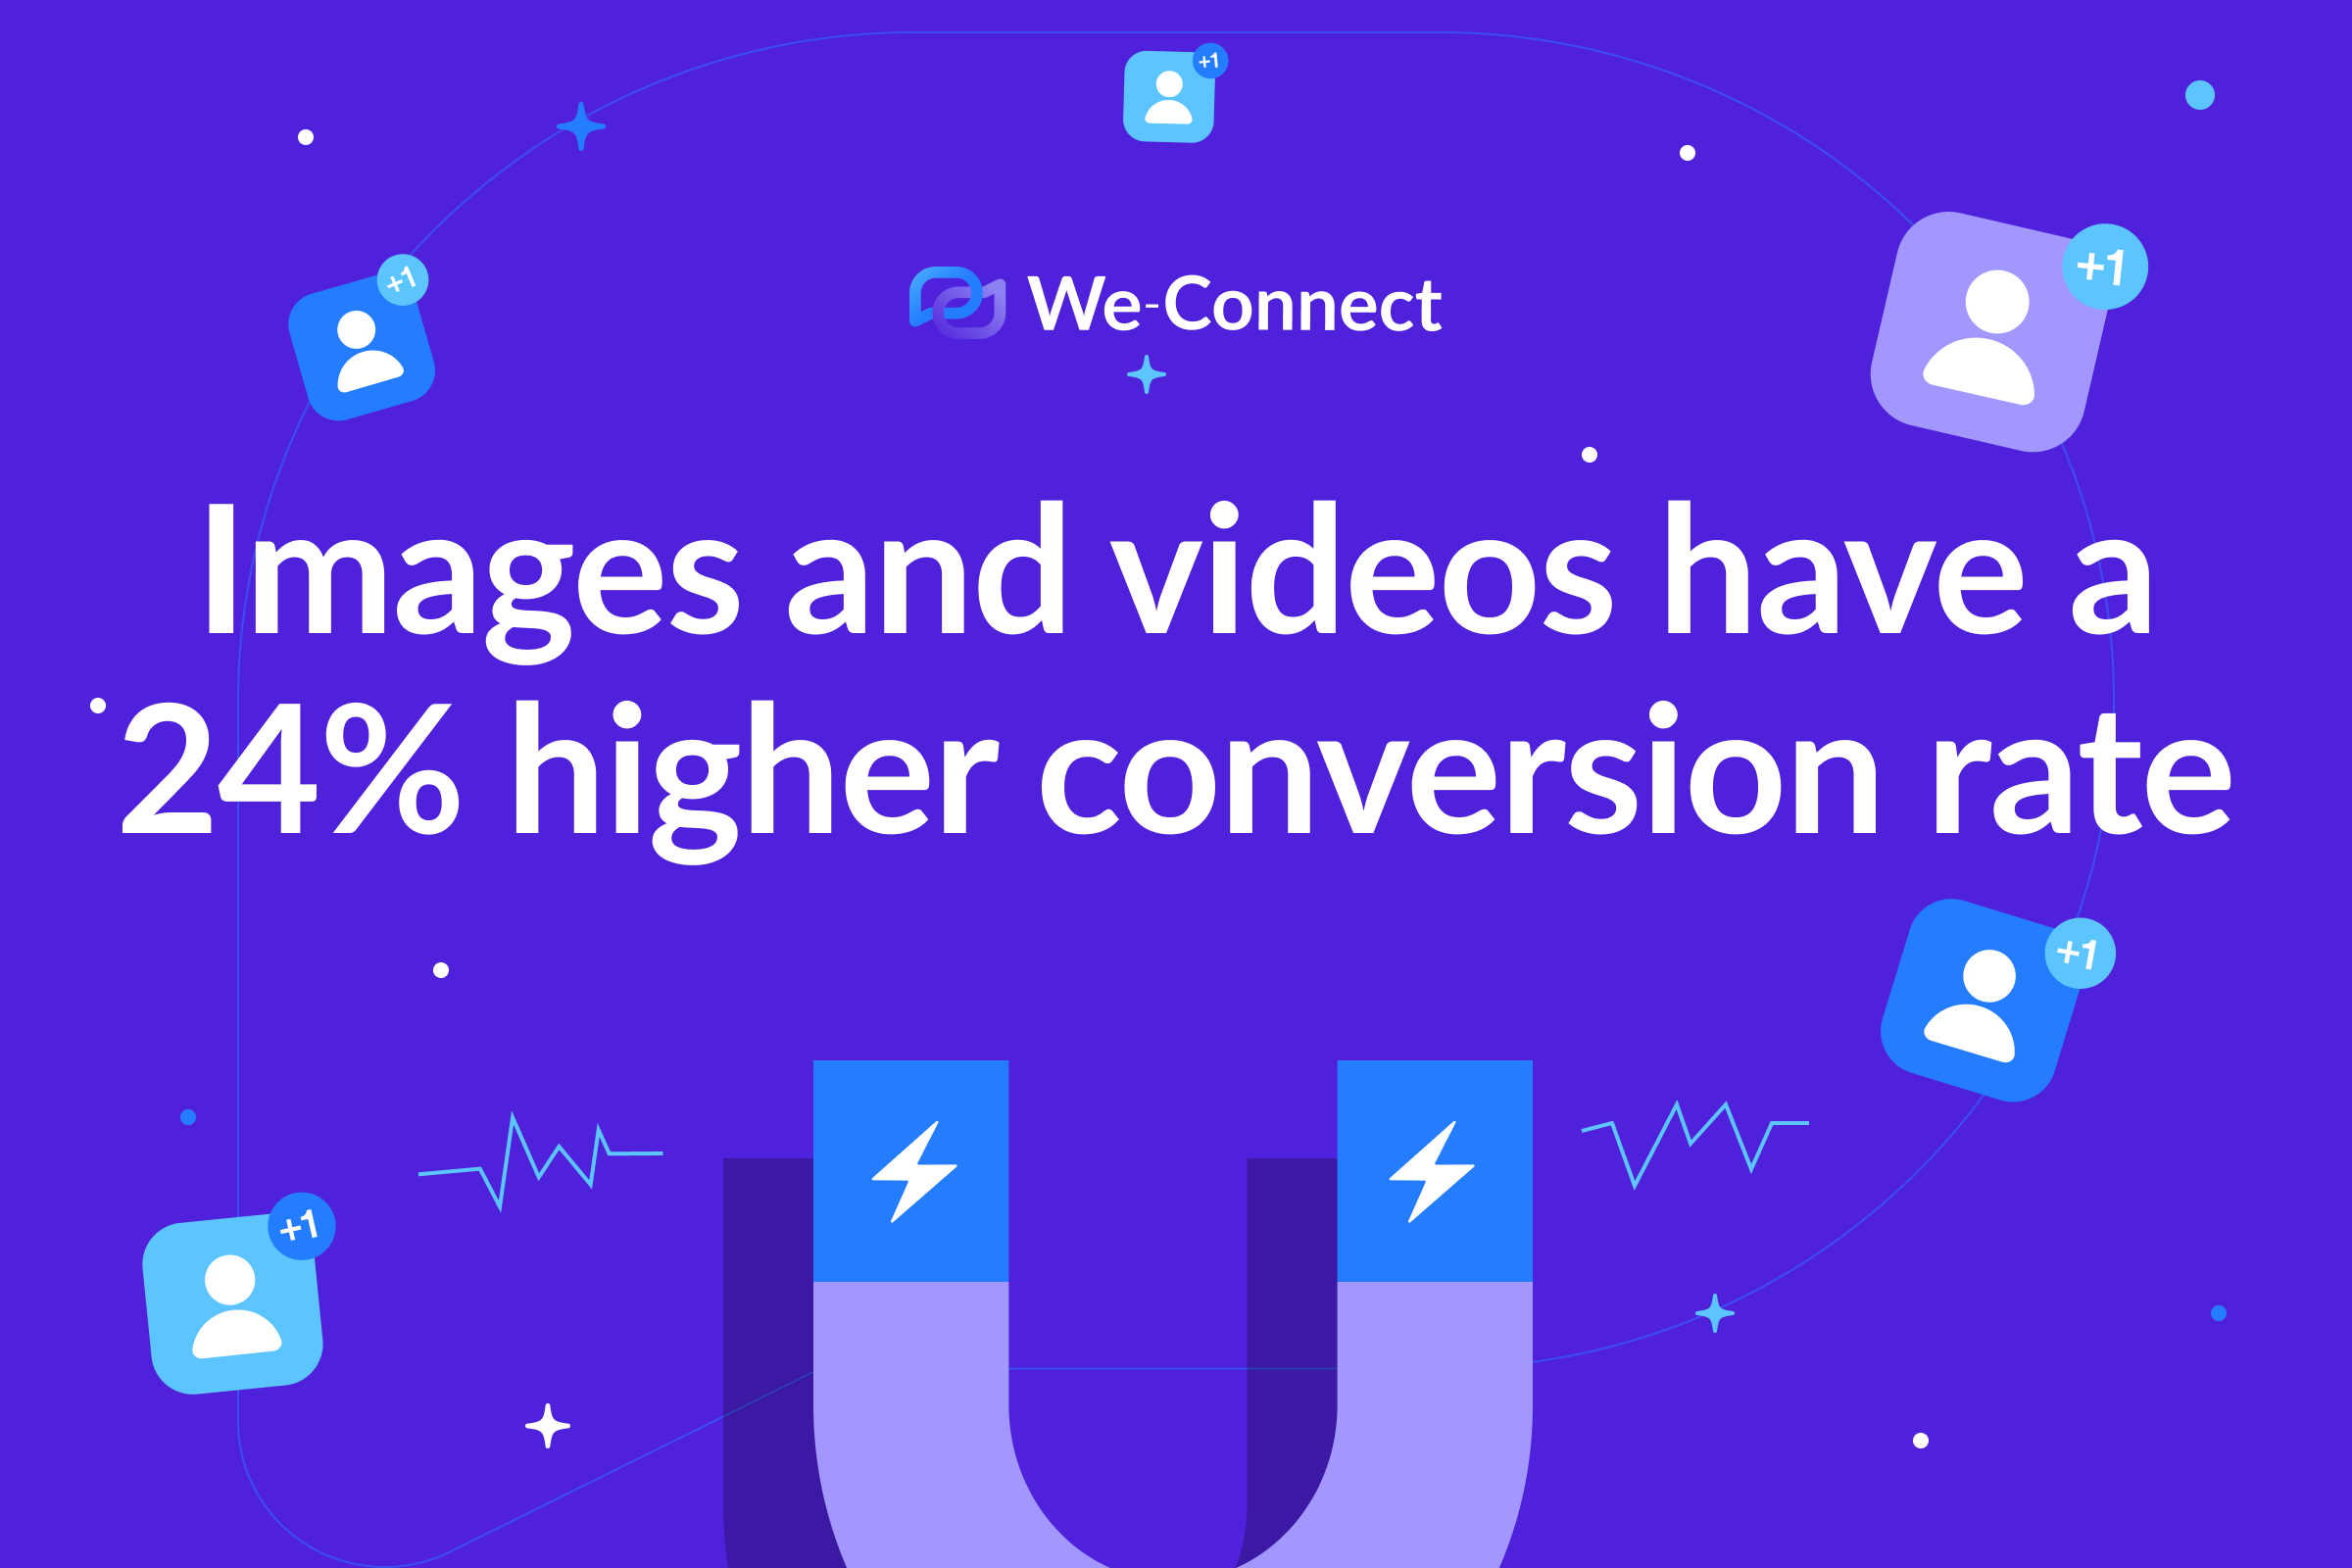 Images and videos have a 24% higher conversion rate